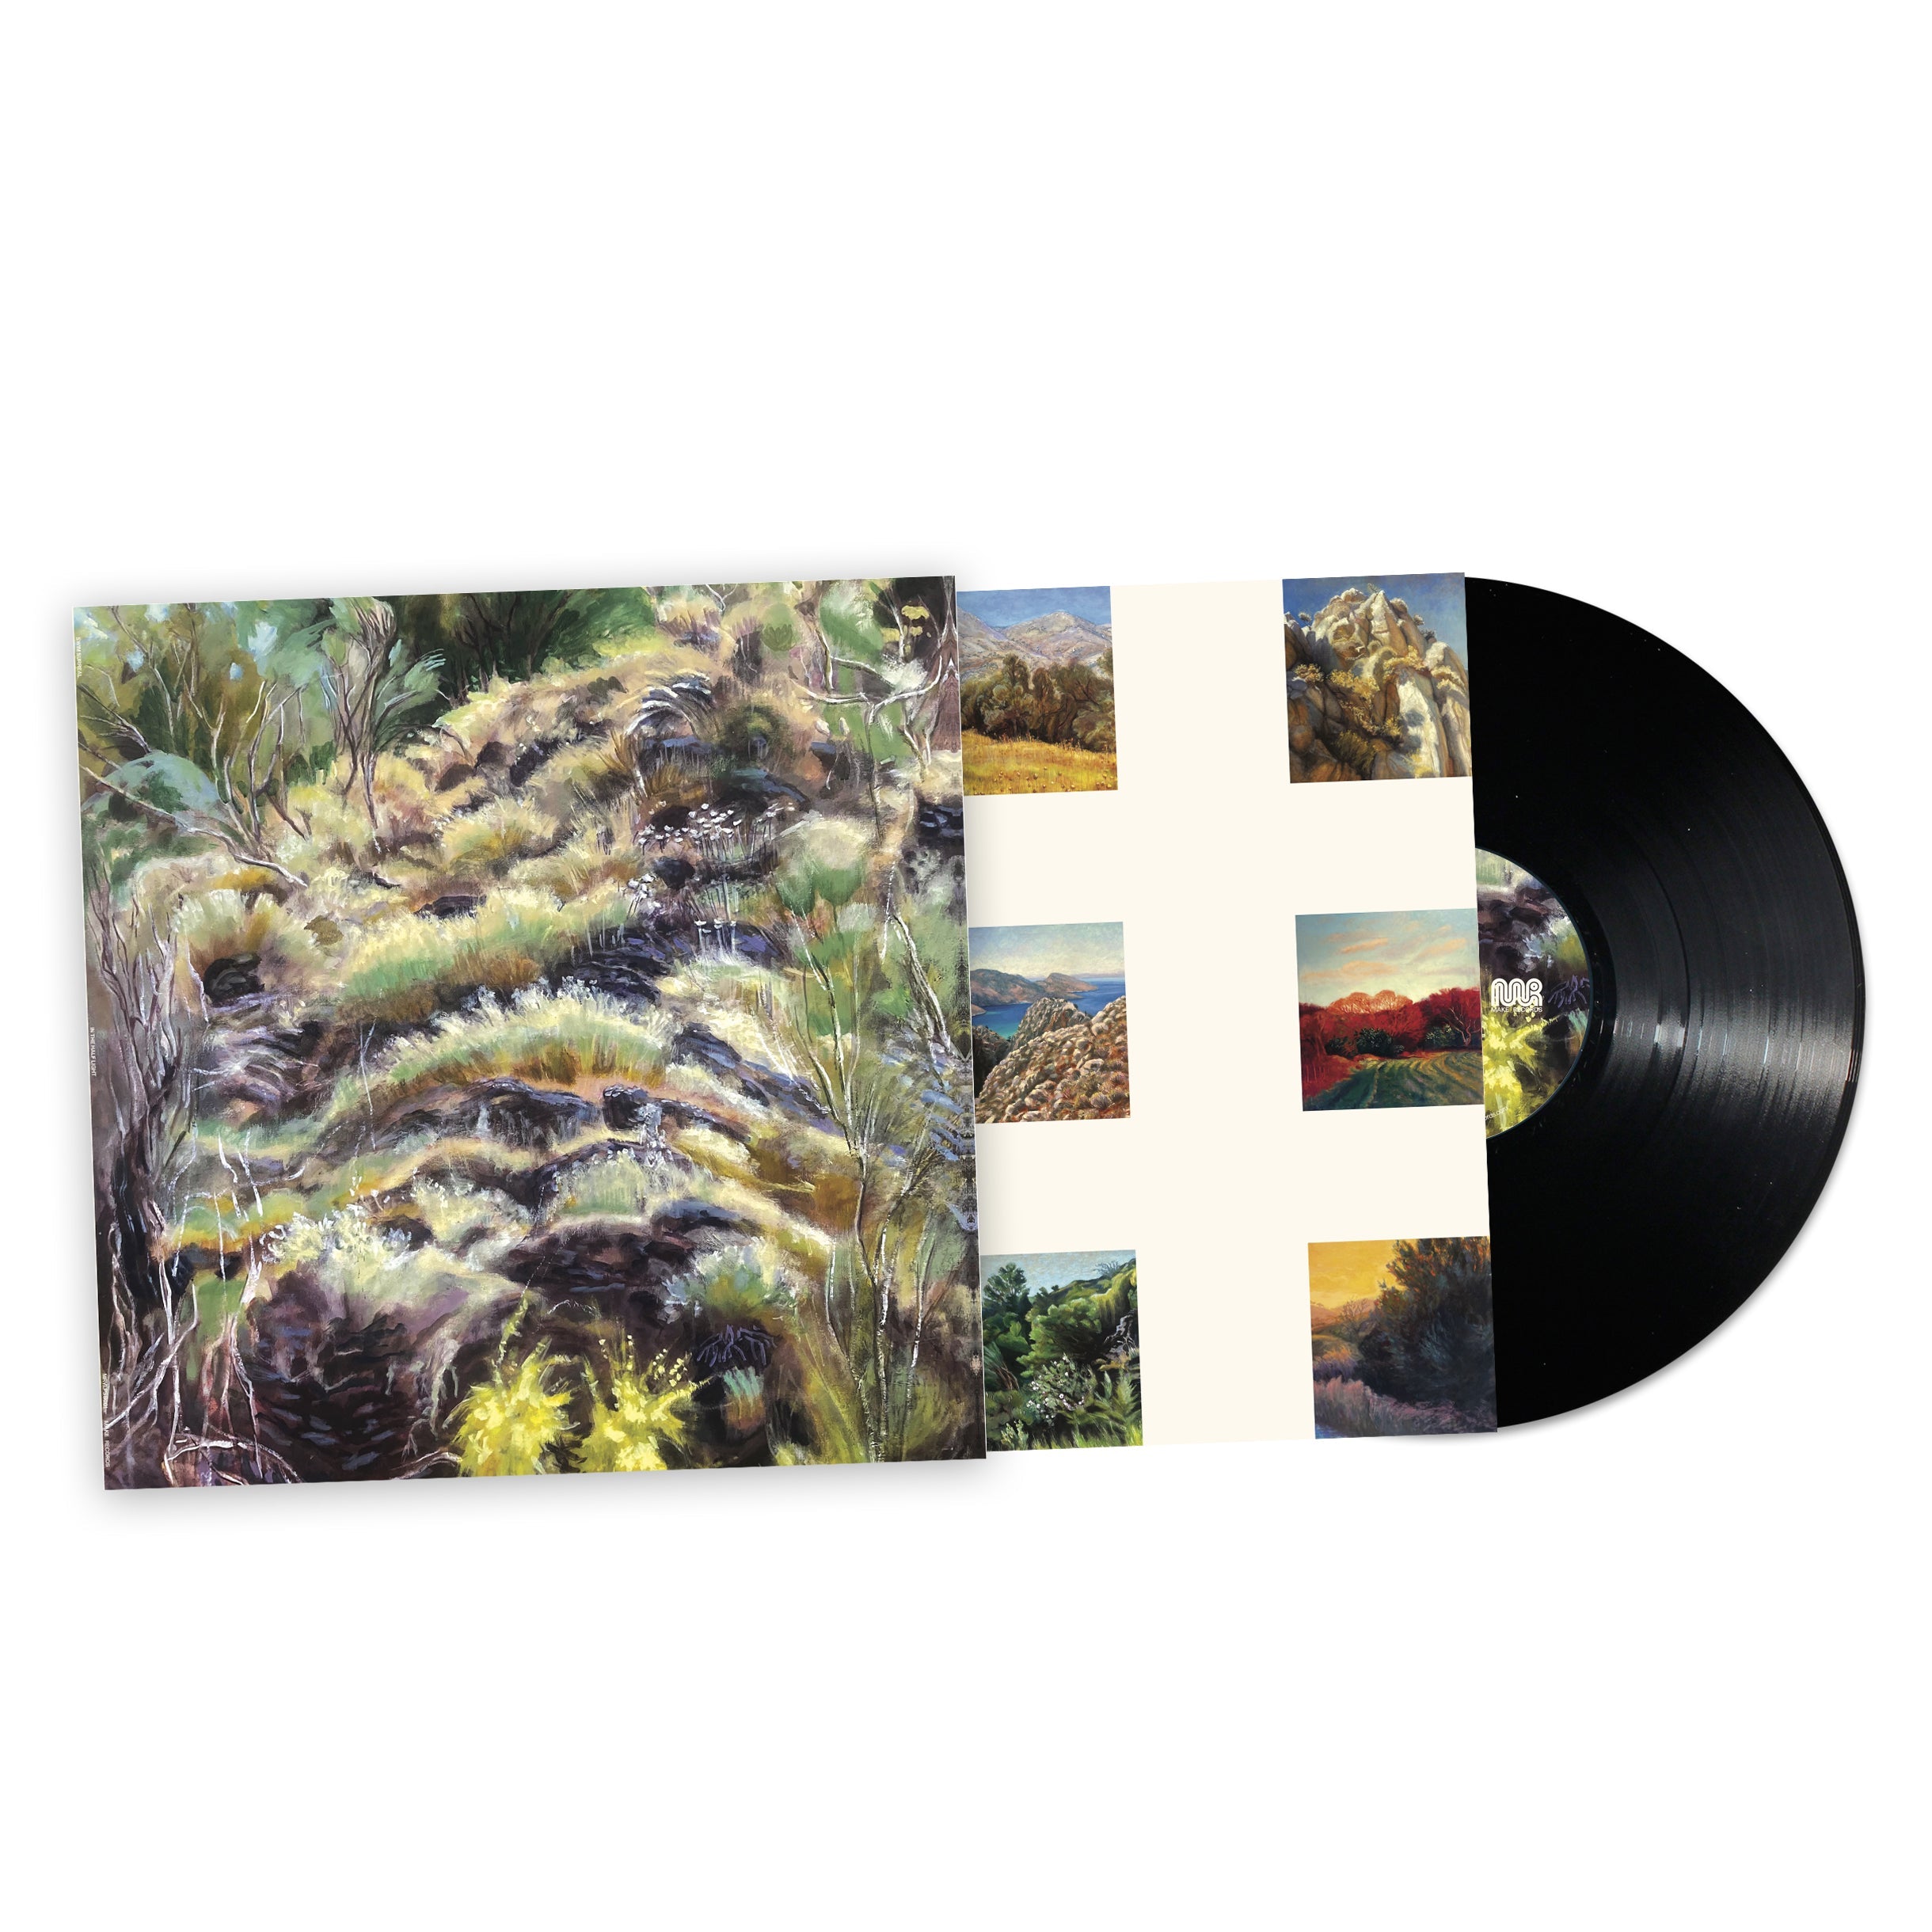 In The Half Light: Bio Vinyl LP & Exclusive Signed A3 Poster